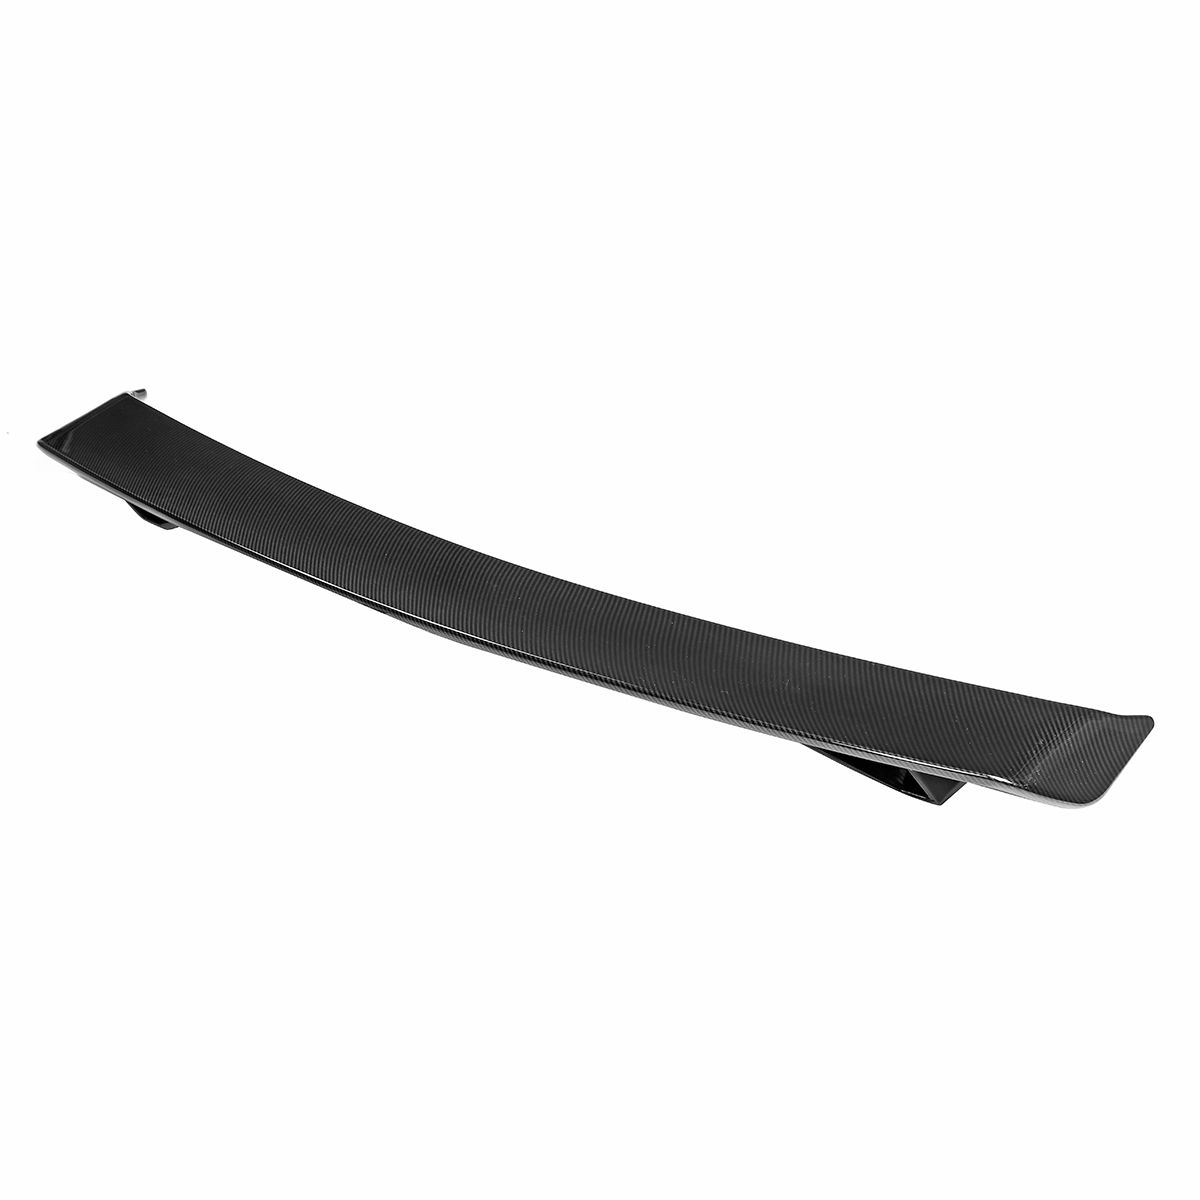 Carbon-Fiber-Type-R-Style-Car-Trunk-Spoiler-Wing-For-Audi-A3-S3-A4-A5-S5-A6-TT-1583796